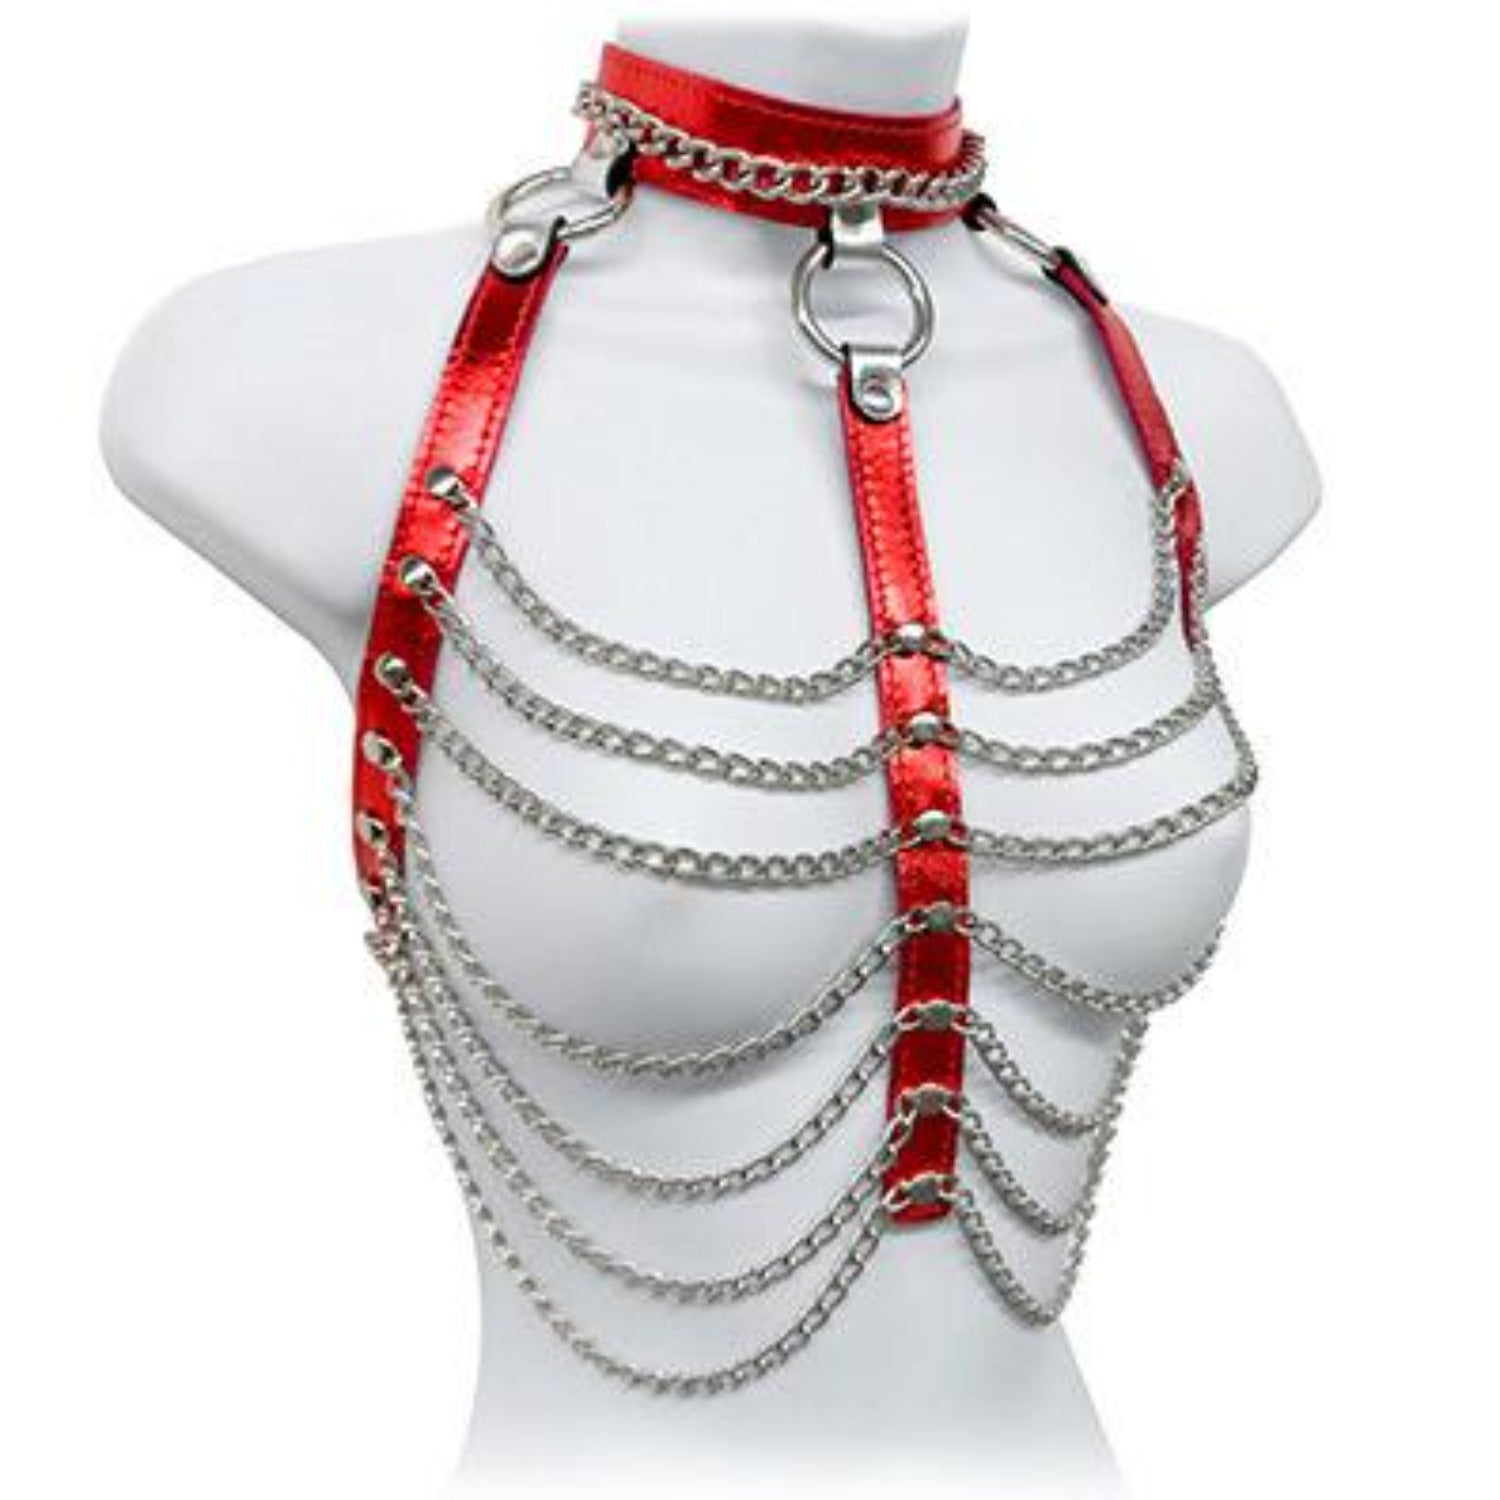 The red metallic leather and chain three column halter harness on a mannequin.